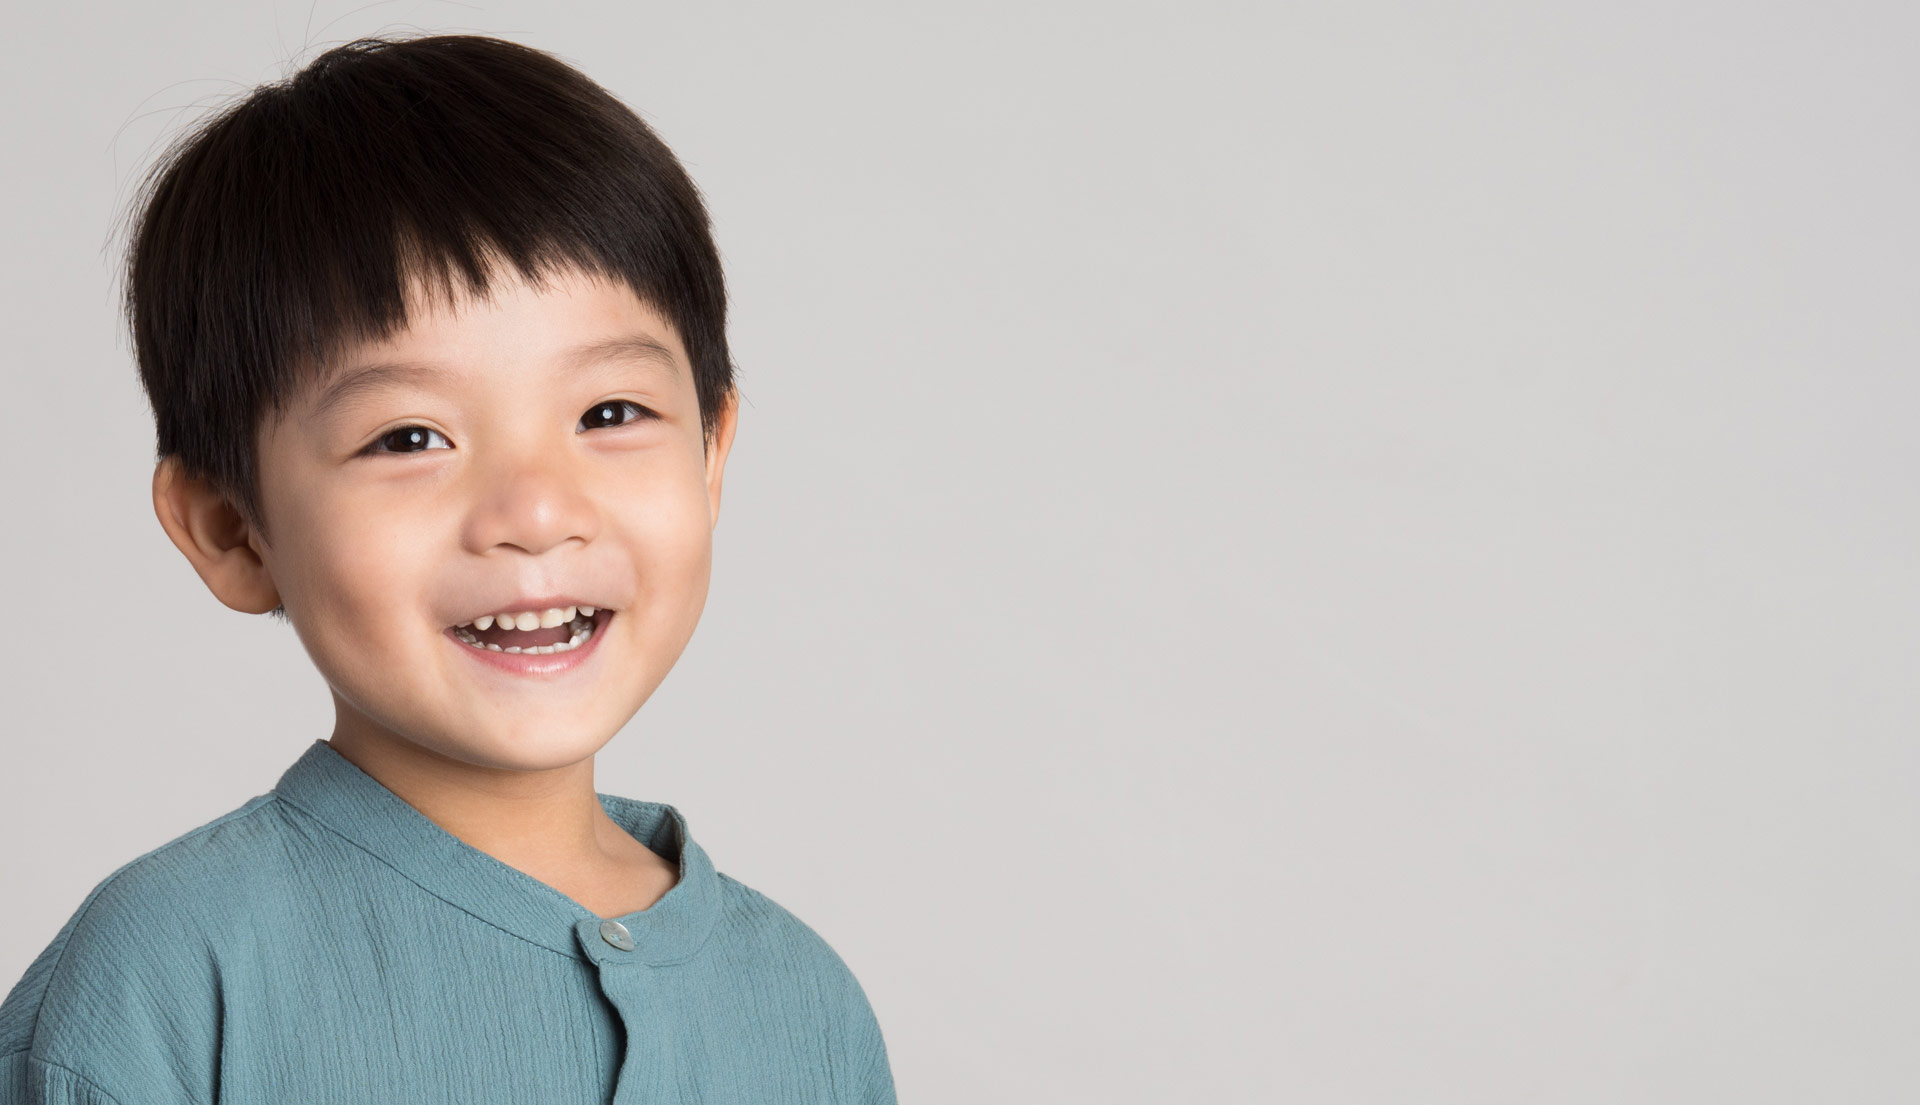 Young Asian American boy smiling with healthy teeth